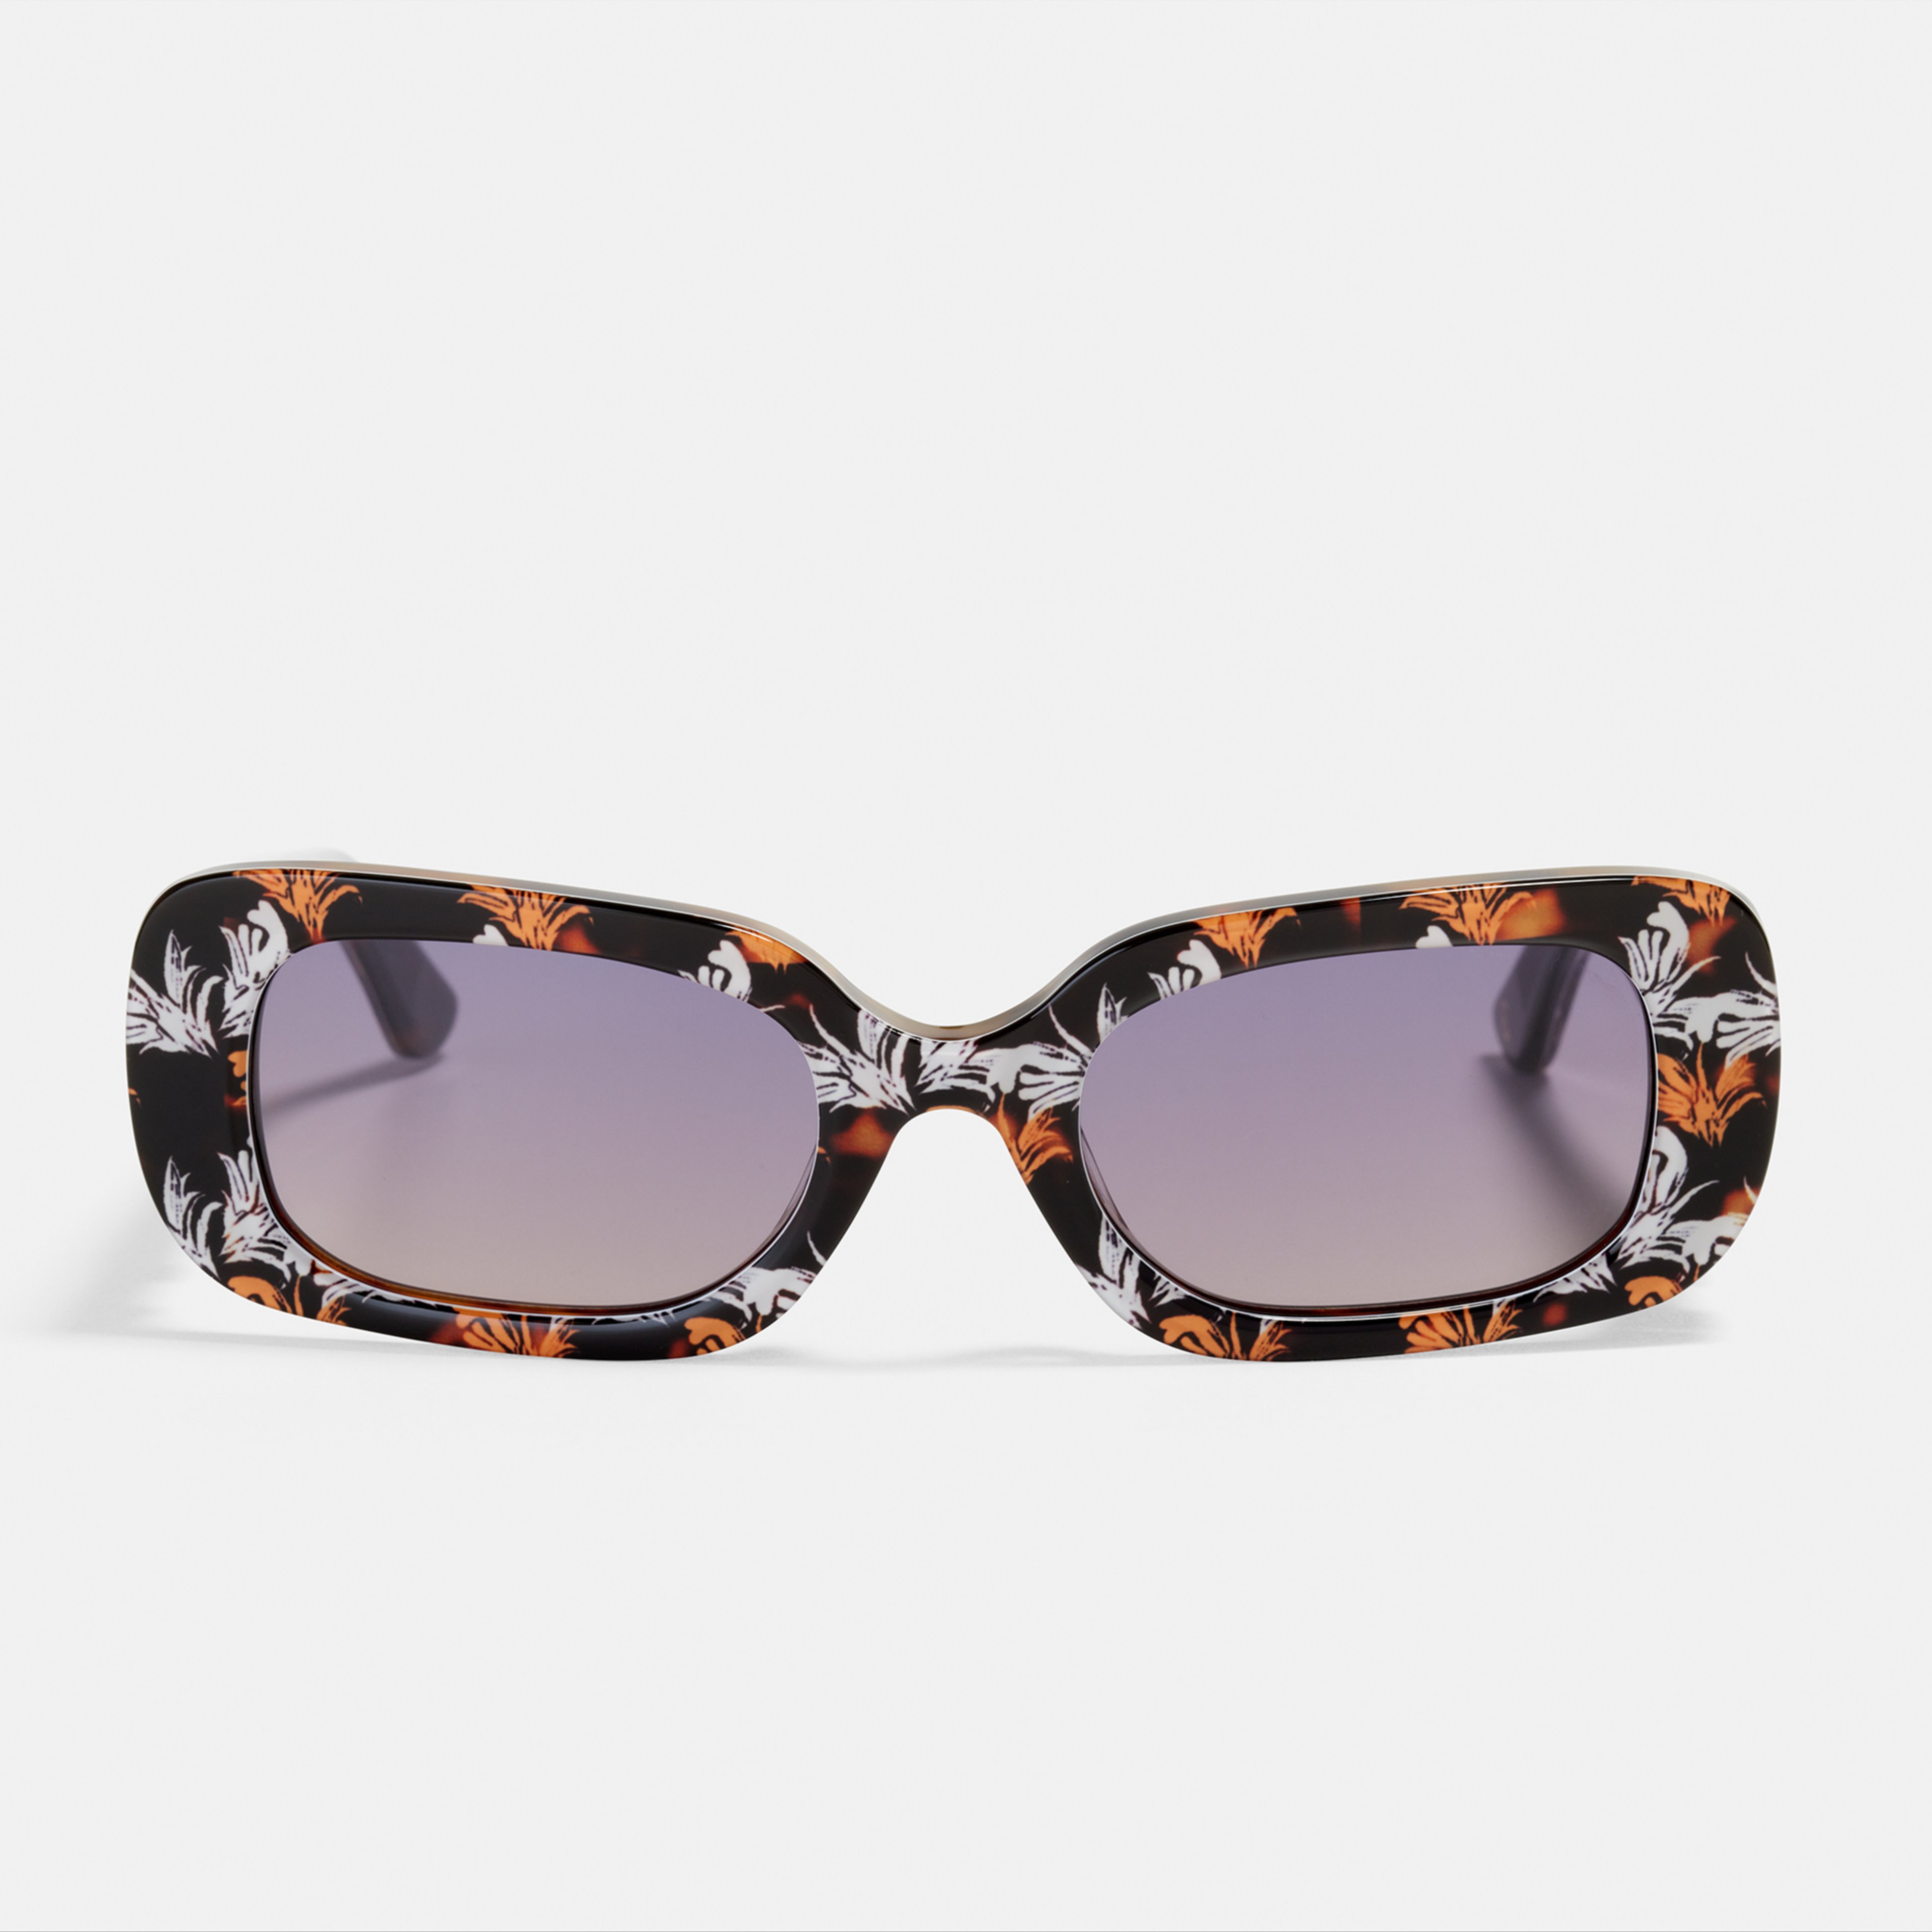 Ace & Tate Sunglasses | rectangle Acetate in Brown